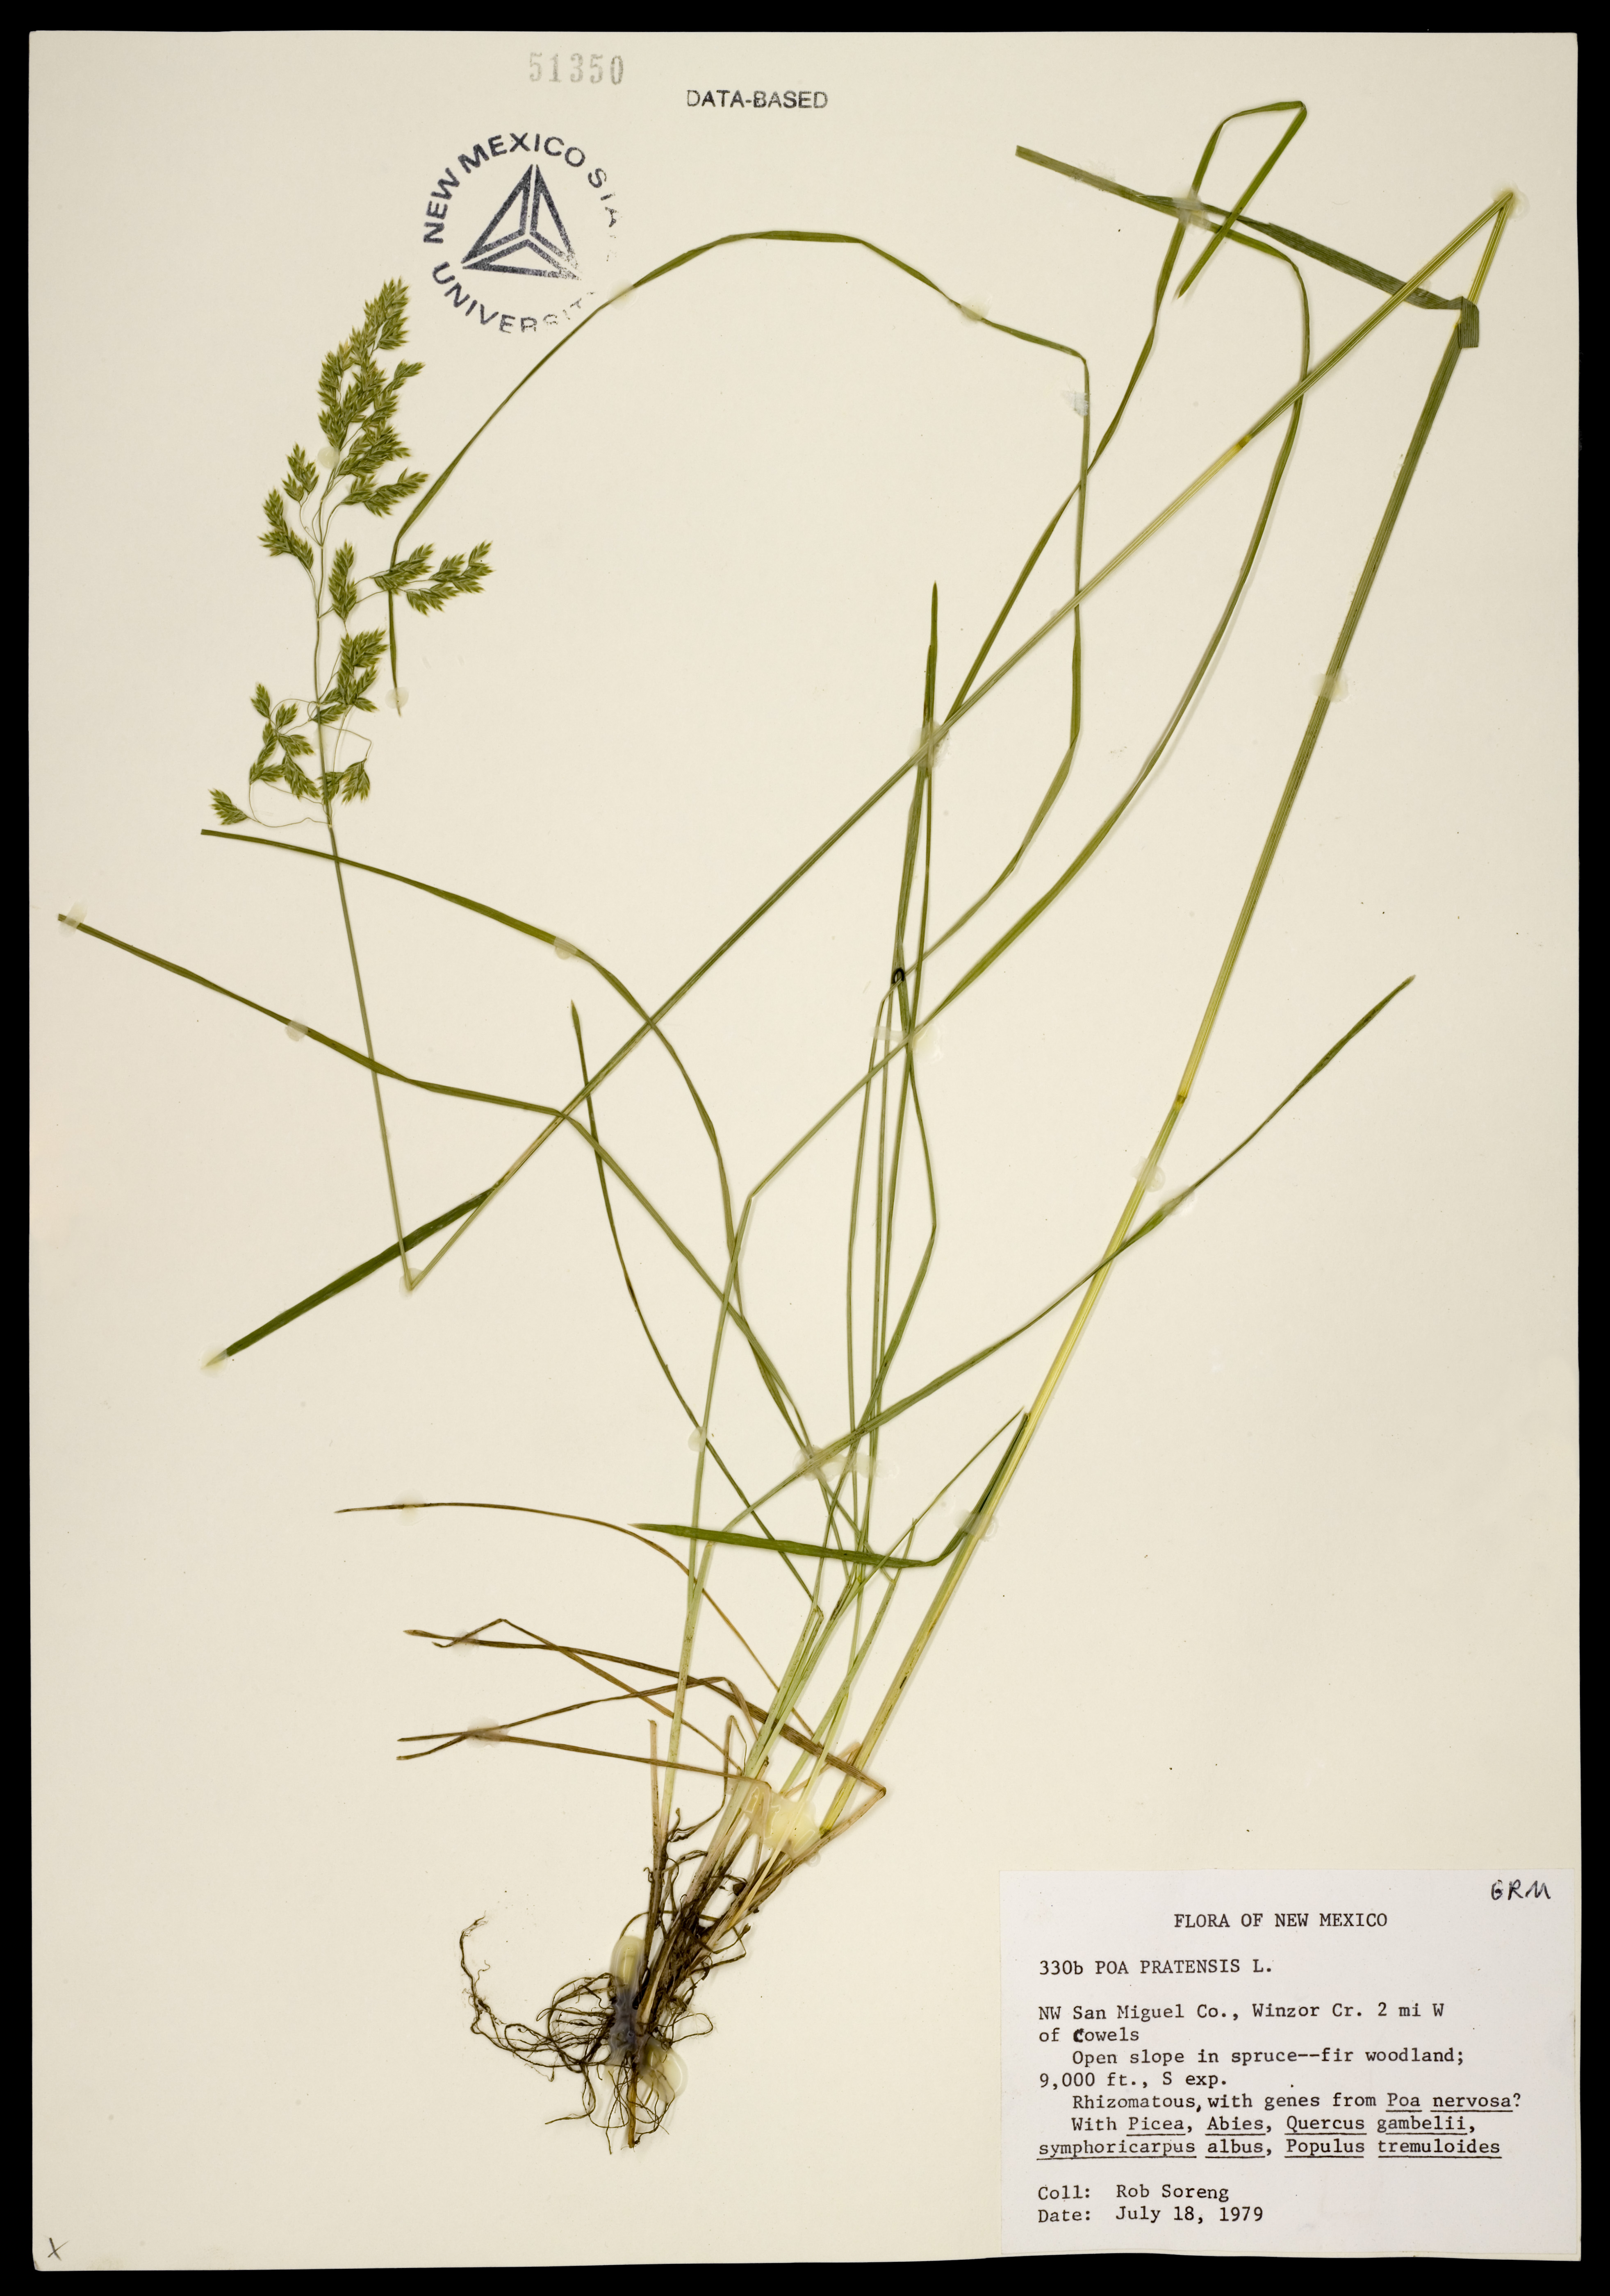 Herbarium specimen showing stems, leaf blades, and panicle